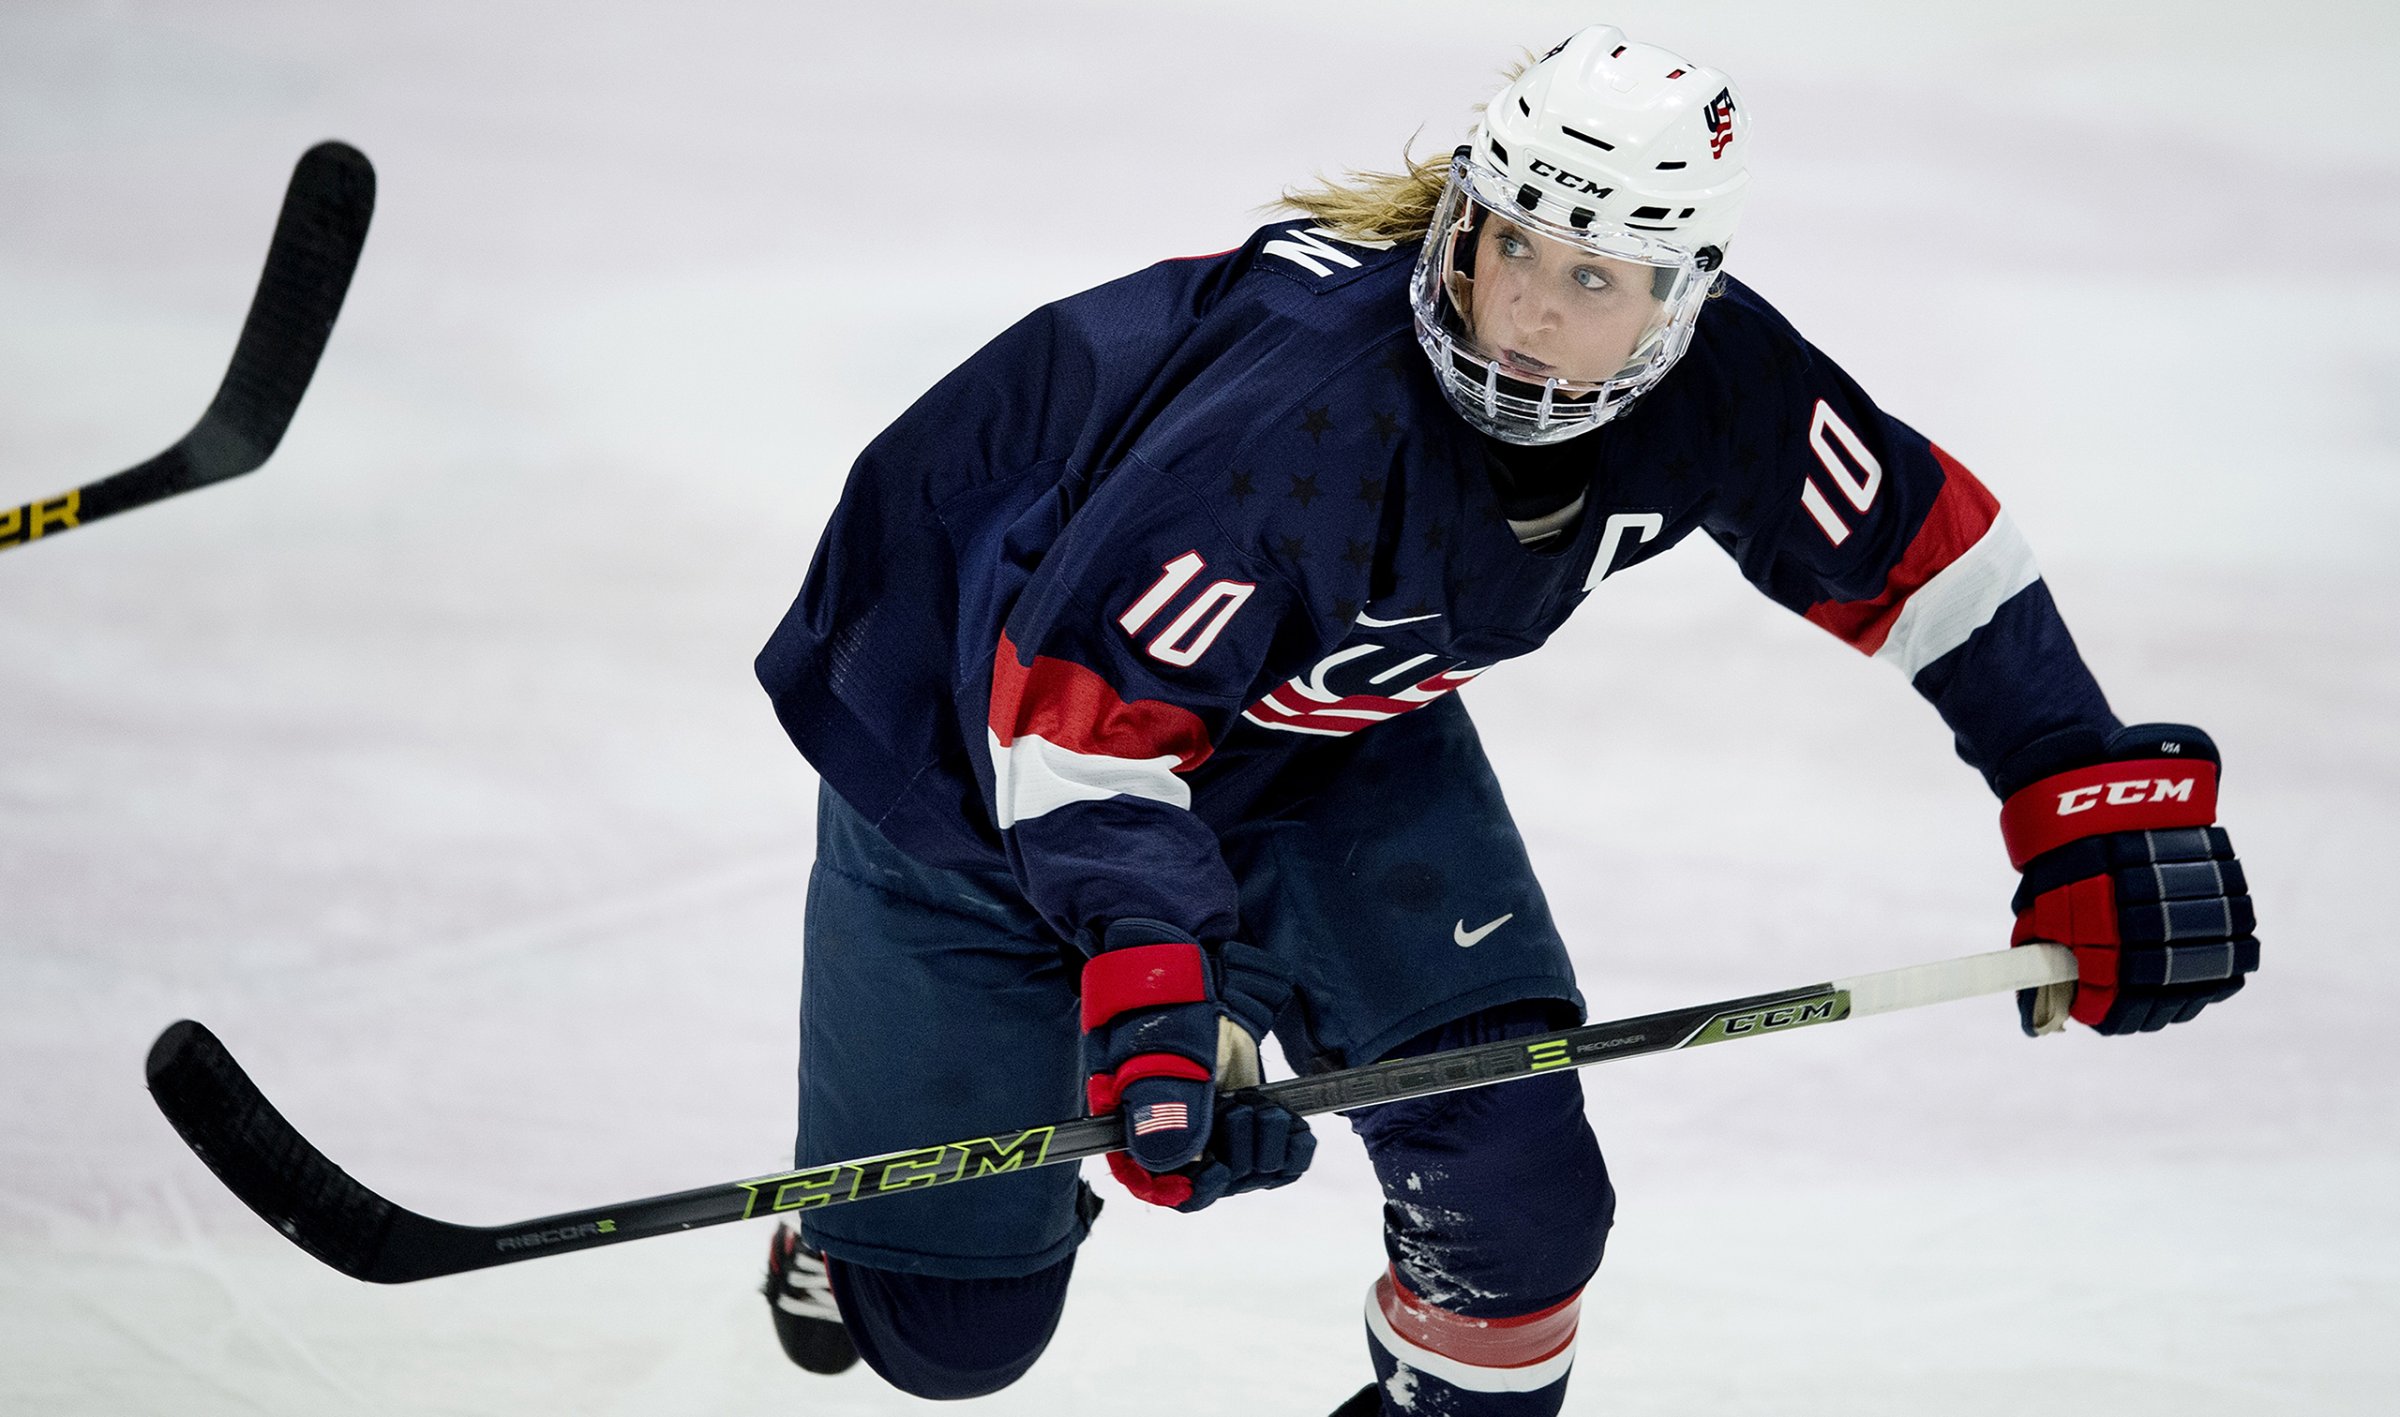 Olympian Duggan is among the U.S. women’s hockey players leading a charge for fairer treatment.